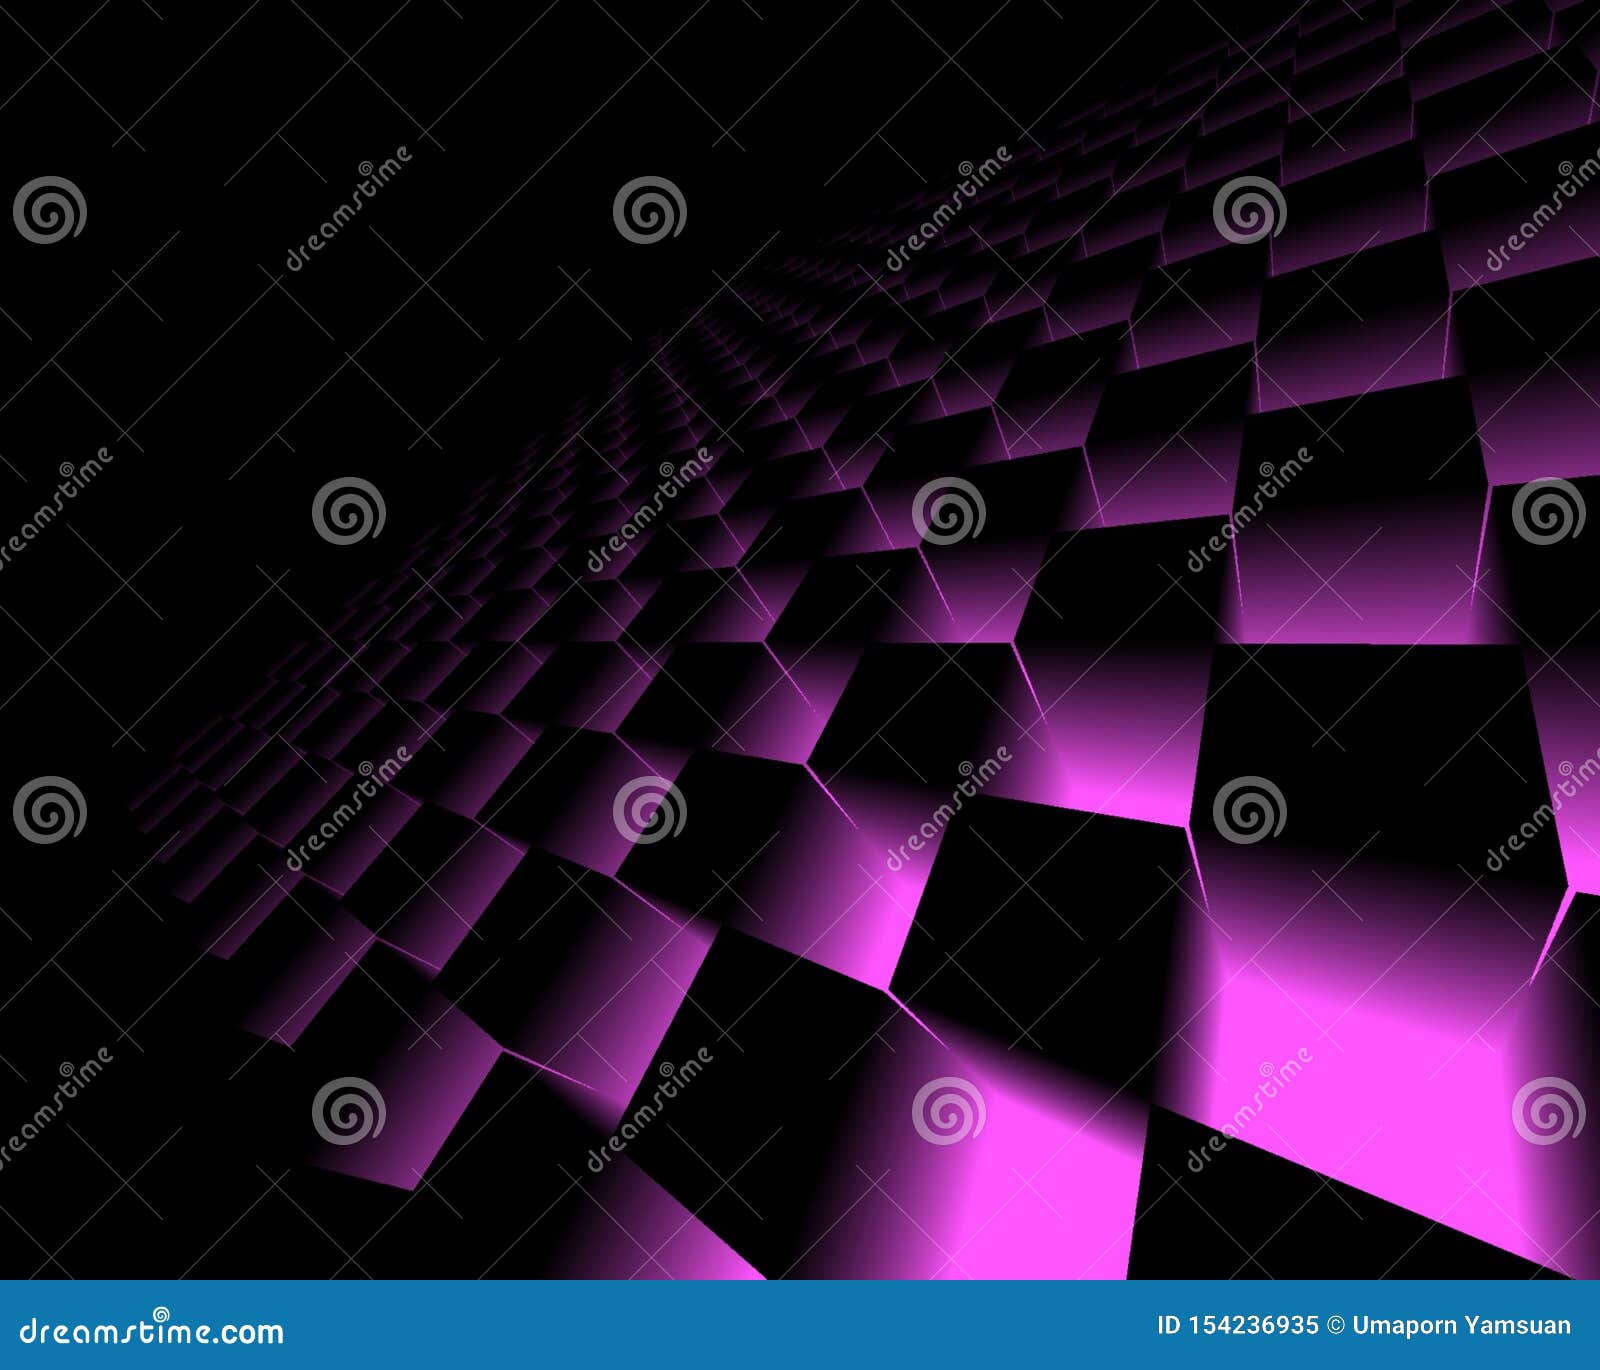 Black and Pink Abstract Background for Desktop Wallpaper or Website Design,  Template with Copy Space for  Illustration Stock Illustration -  Illustration of gray, layout: 154236935